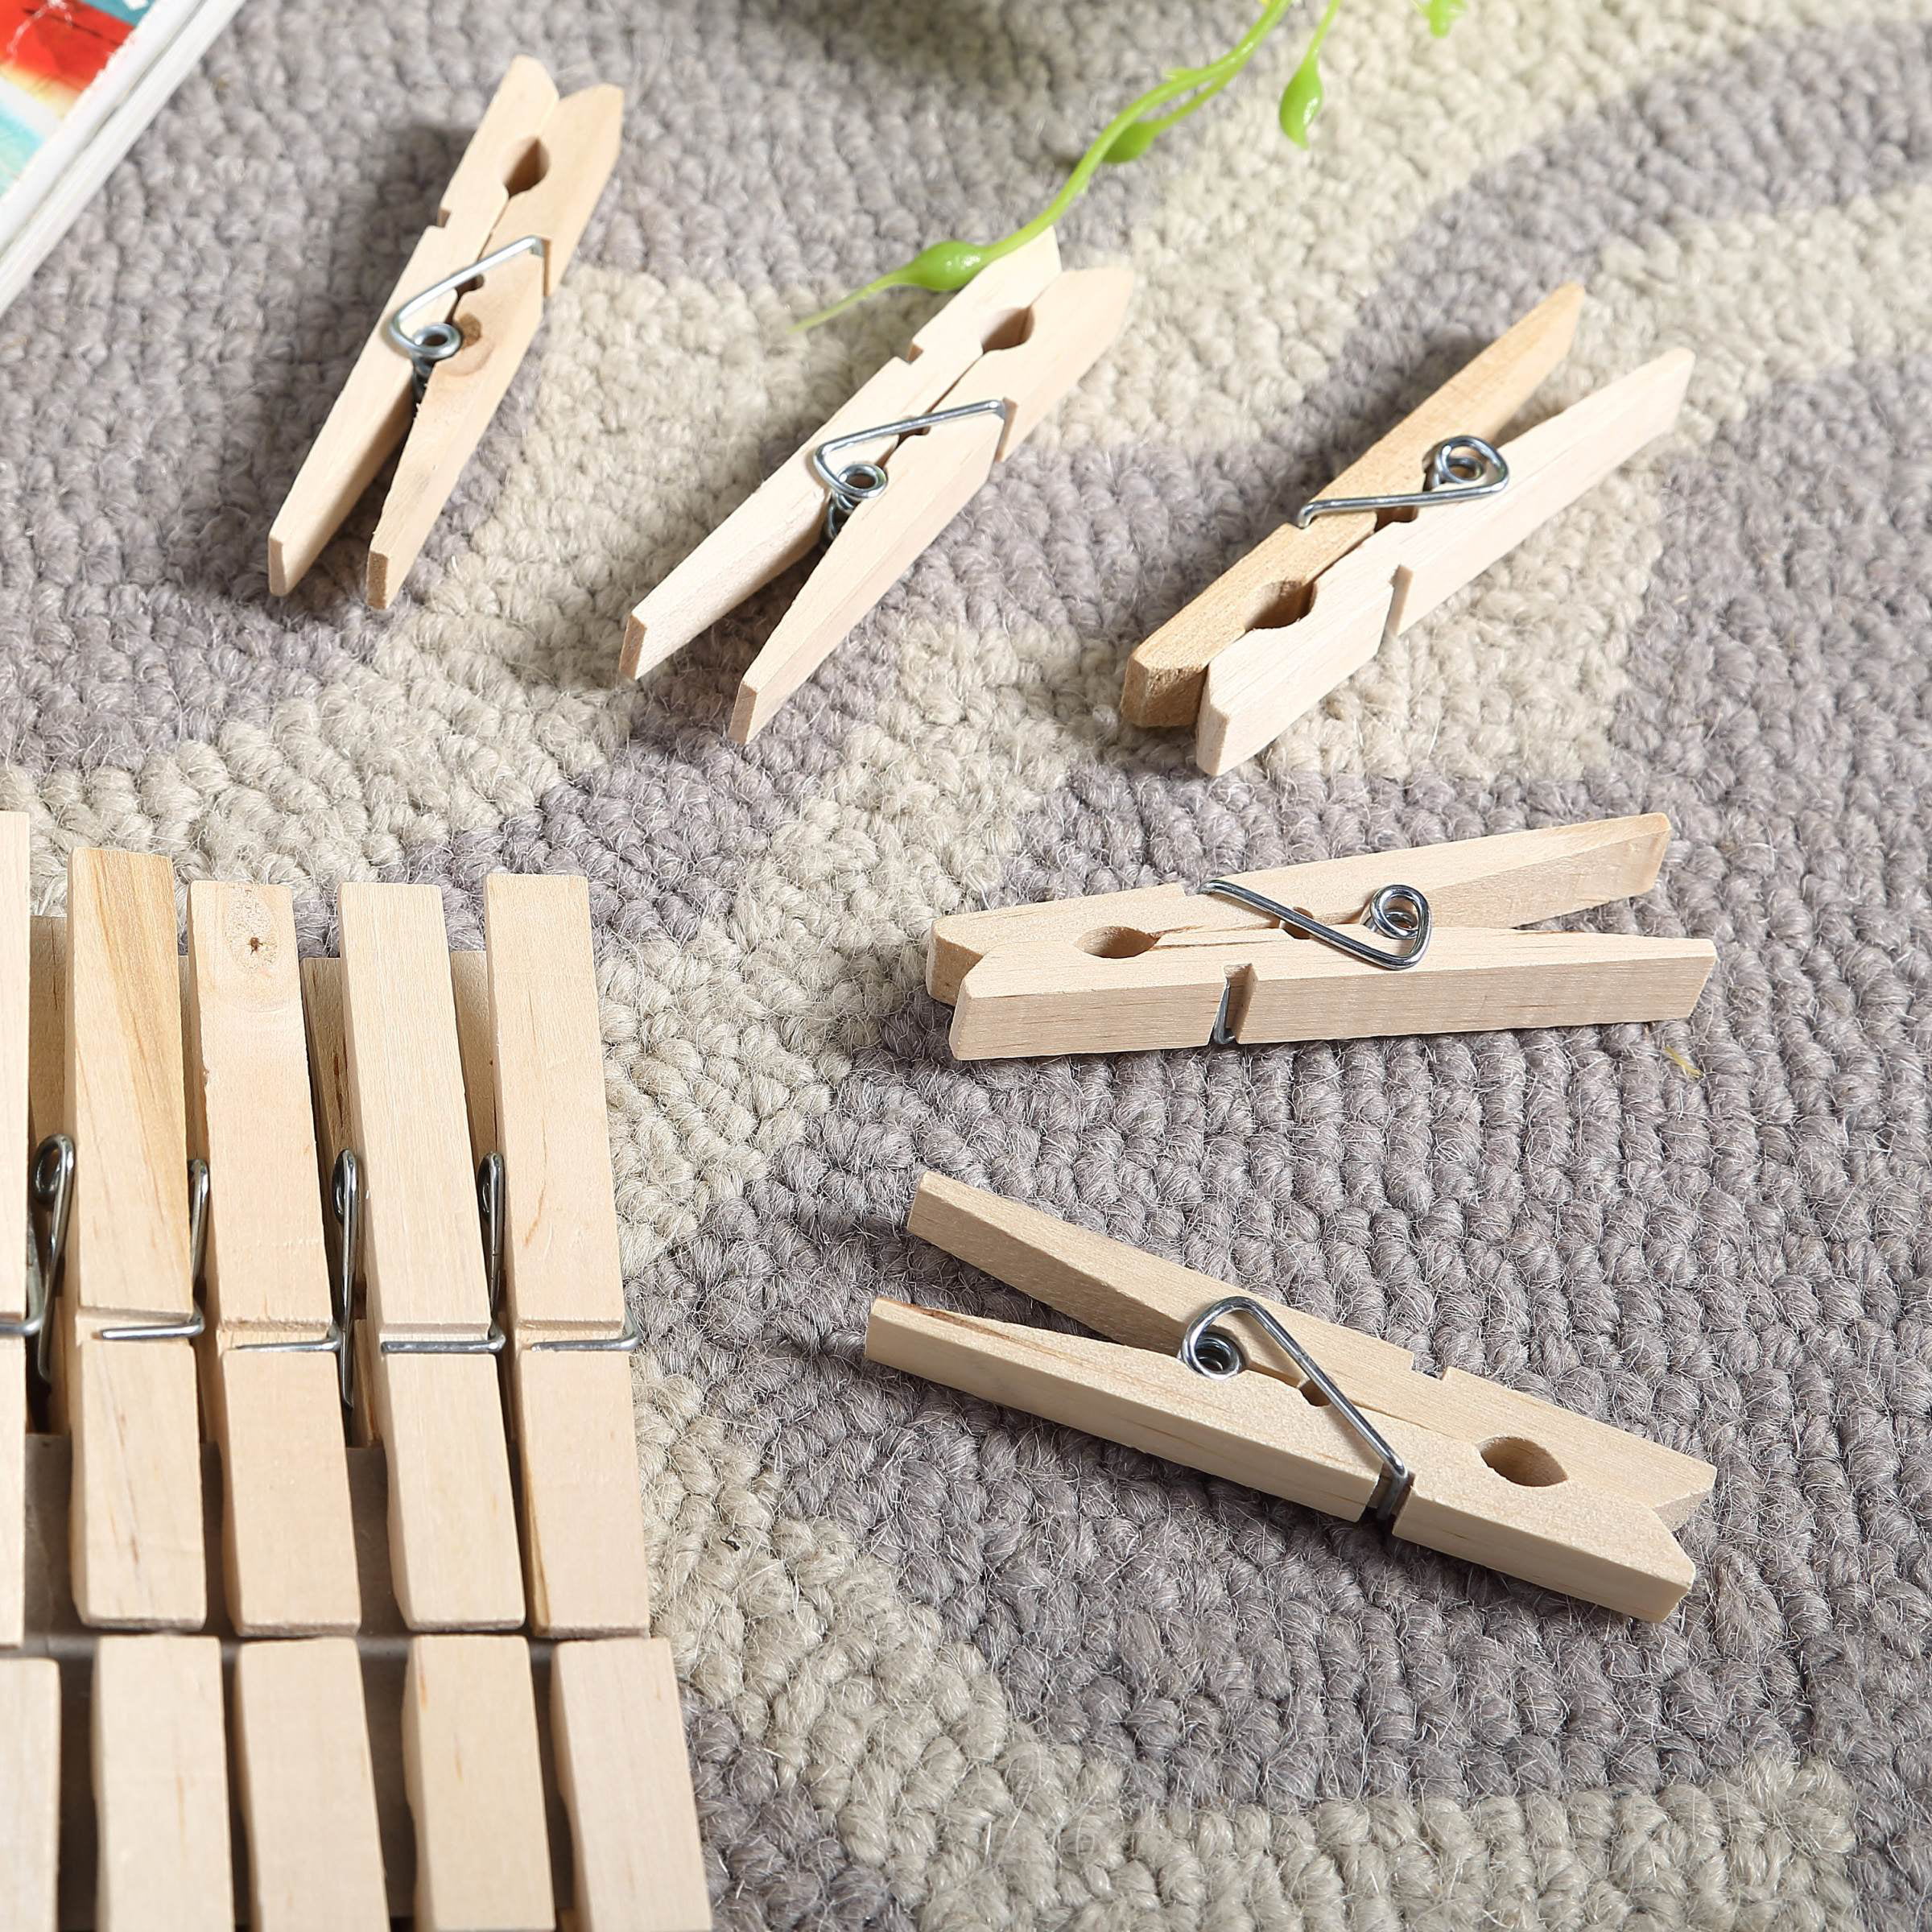 KOMBIUDA 100 Pcs Wooden Clothespins Small Clothes Pin Clothespins for  Hanging Clothes Colored Clothespins Wood Clothes Pin Laundry Clips Giant